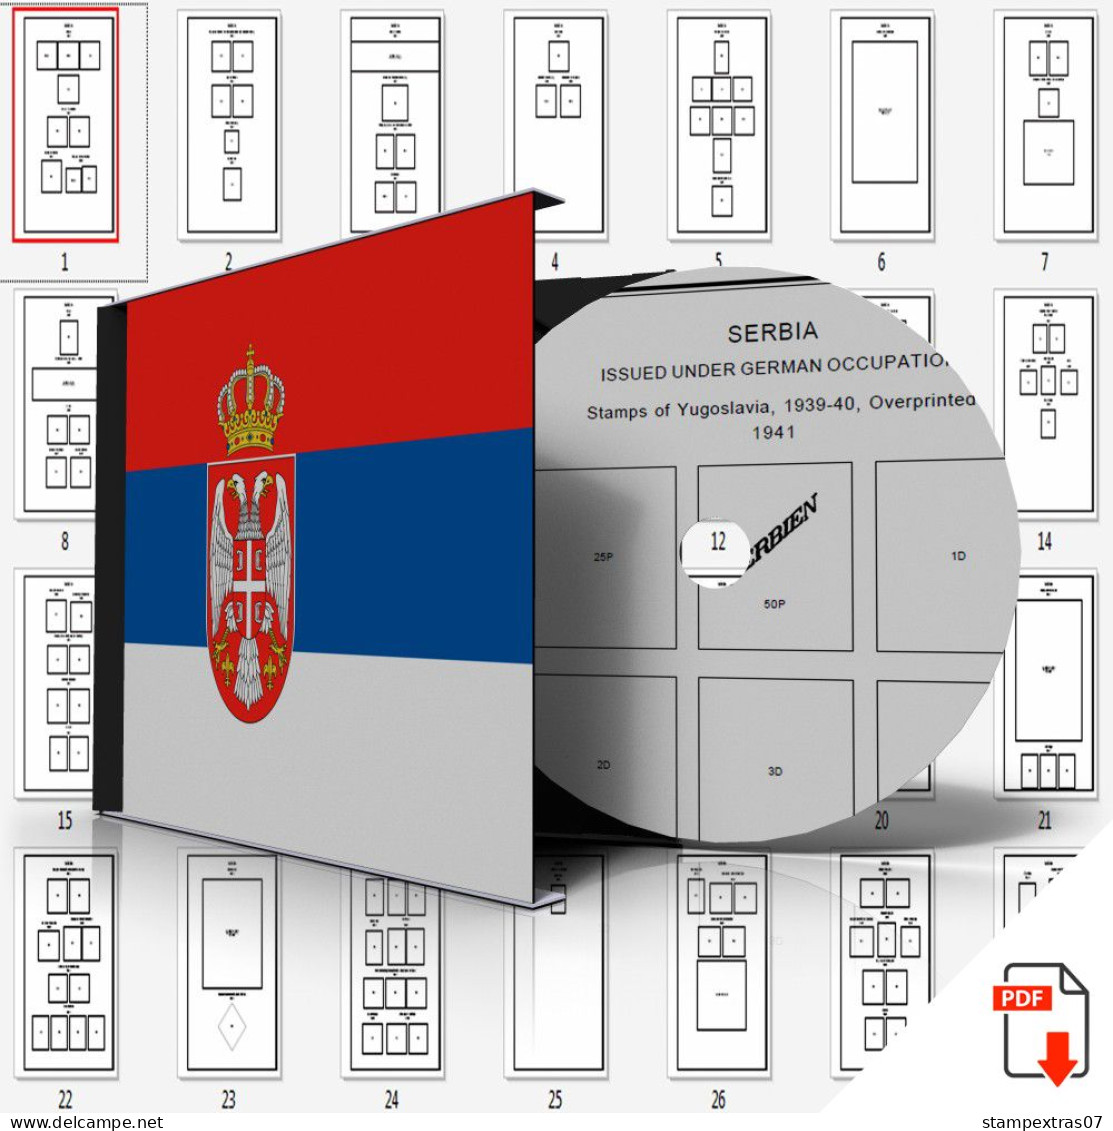 SERBIA STAMP ALBUM PAGES 1866-2011 (101 Pages) - Inglés